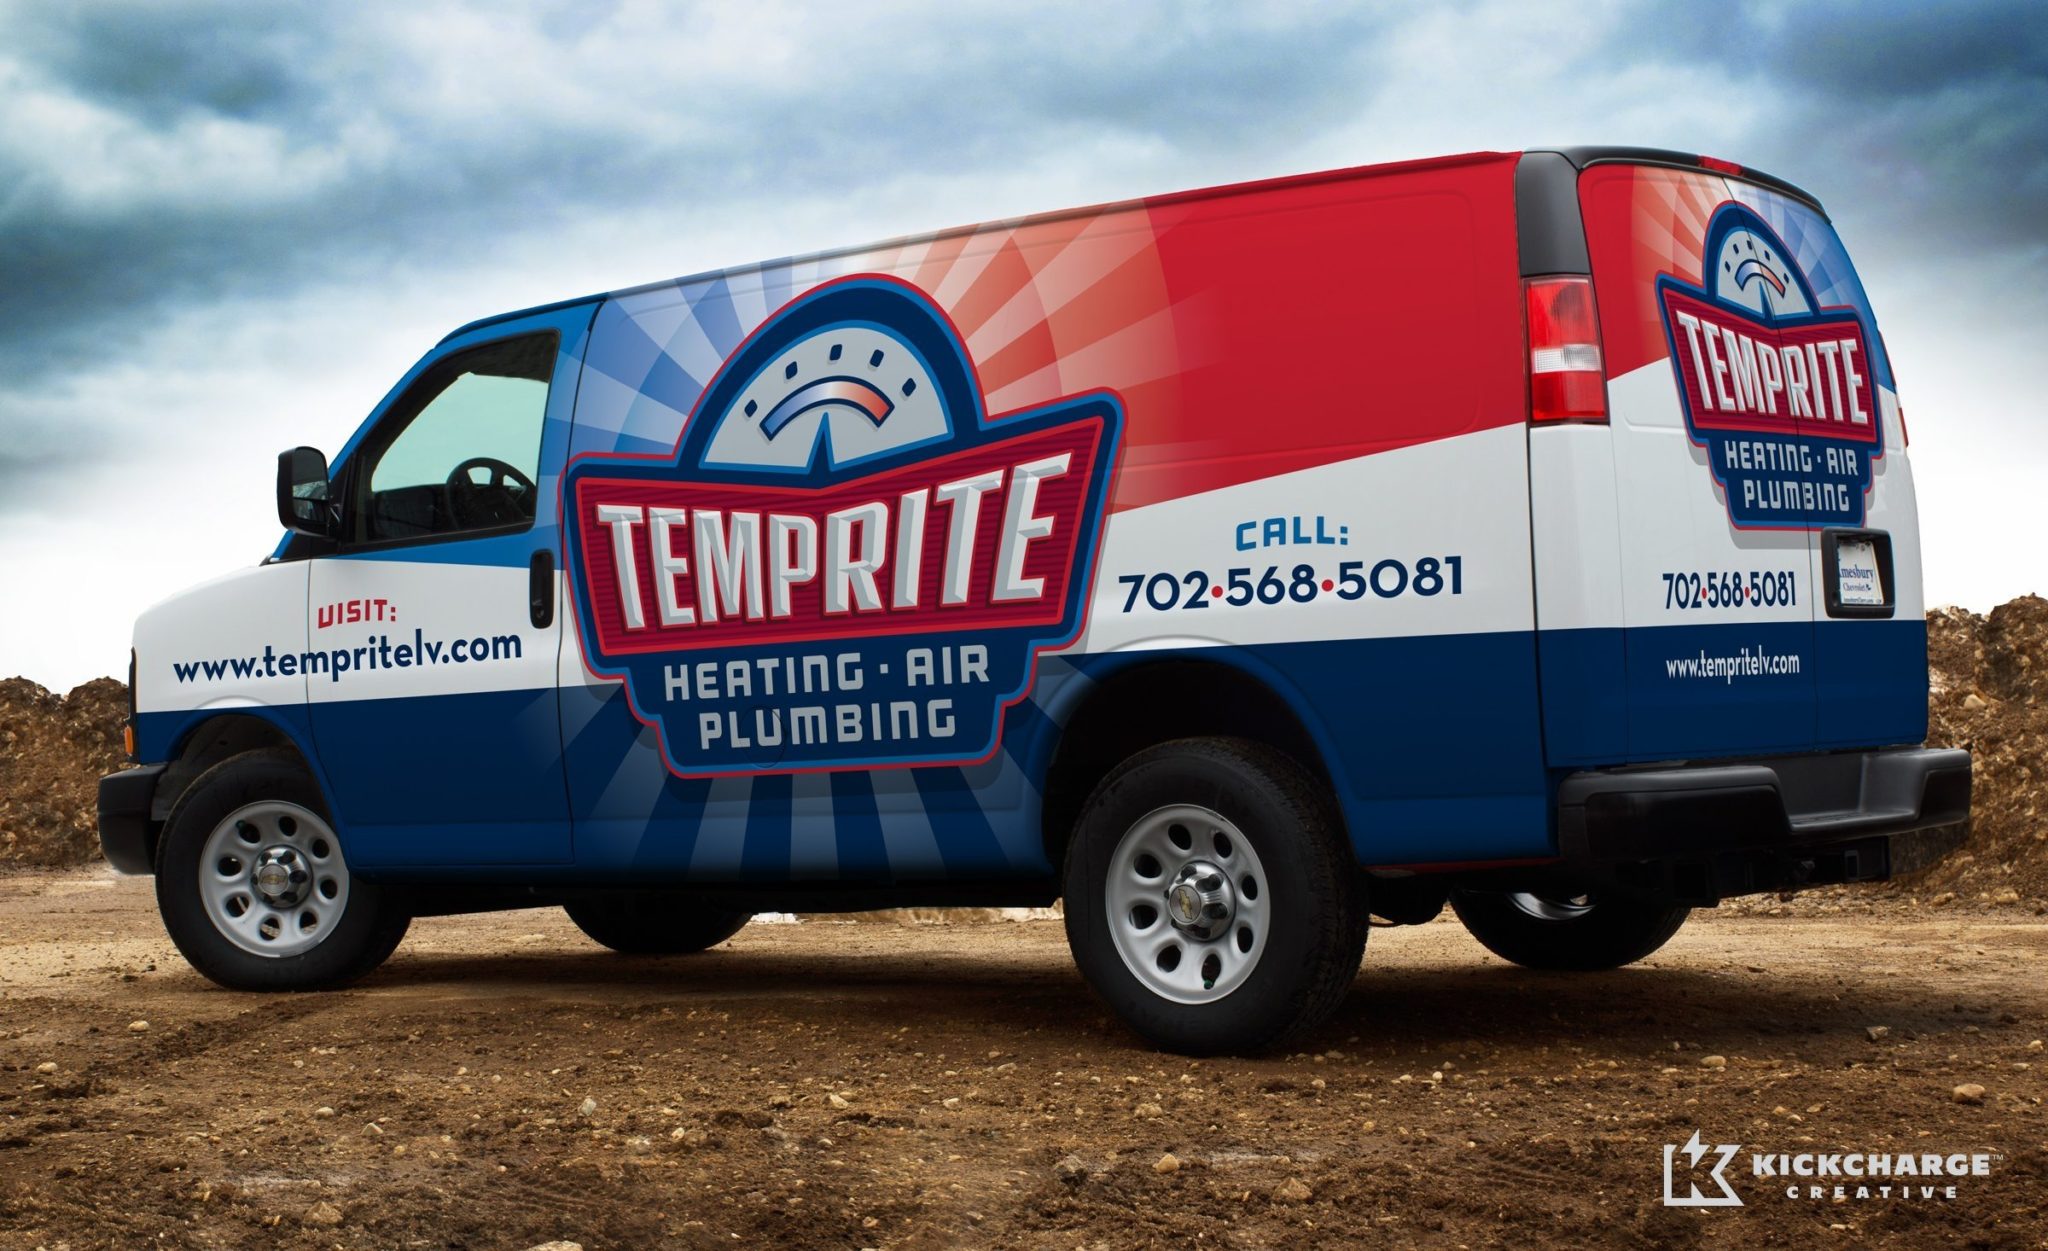 A vehicle wrap design for a heating and air conditioning contractor in Las Vegas.